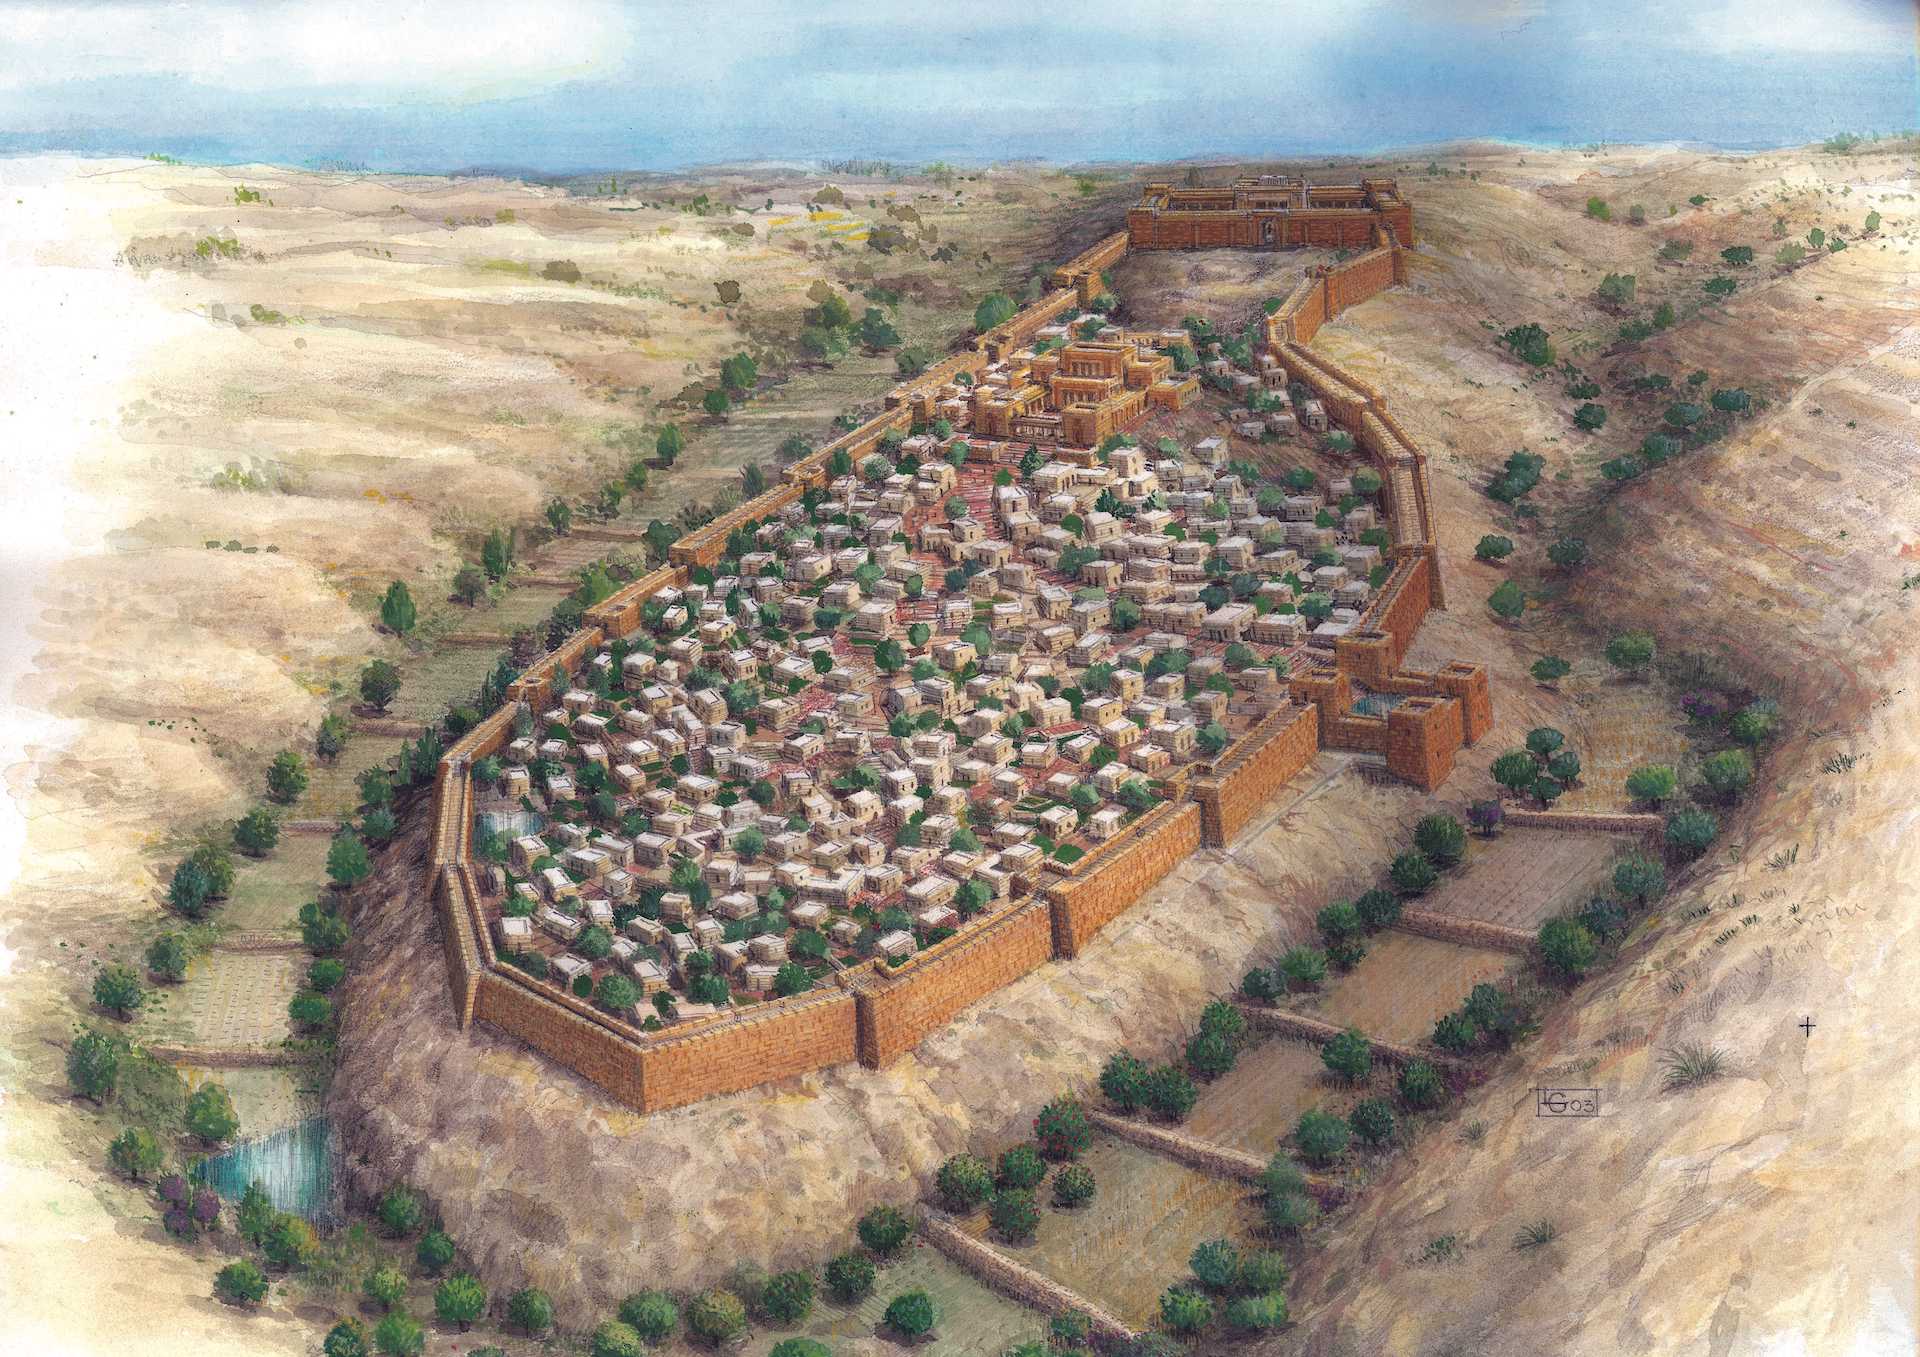 Illustration of an ancient city within a wall and surrounded by a ditch. Trees line the ditch and logs are laid across it. City appears to be in a desert environment.